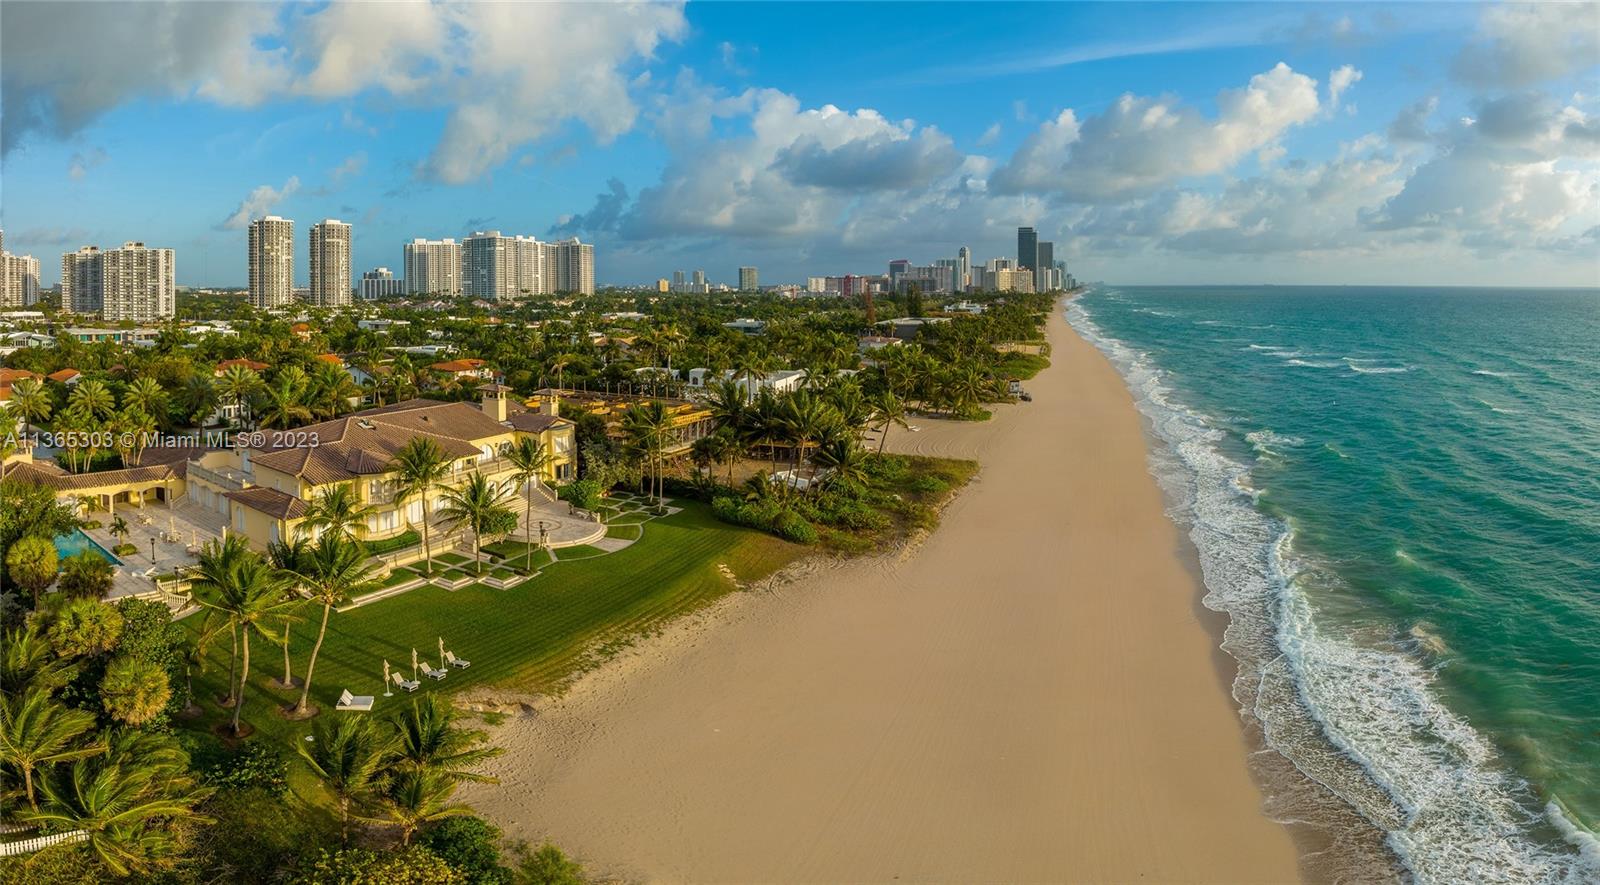 Own a piece of paradise, the largest oceanfront estate in all of Miami. Spanning 250’ of white sand pristine ocean frontage on 1.5 acres this extraordinary property boasts unparalleled views of sparkling blue waters of the Atlantic ocean. Miami’s ultimate beachfront trophy property located in the exclusive Golden Beach enclave presents a once-in-a-lifetime opportunity for the most discerning buyer seeking to build an estate of their dreams or renovate w/ approved plans for an elegant 10 BD, 30,000 SF home w/ soaring ceilings & ocean breezes. Enjoy privacy & security in a serene coastal utopia, with its own police force and marine patrol. Live just minutes from world-class shopping, dining, a private beachfront clubhouse and tennis courts. Endless sunrises & white sand beaches await you.